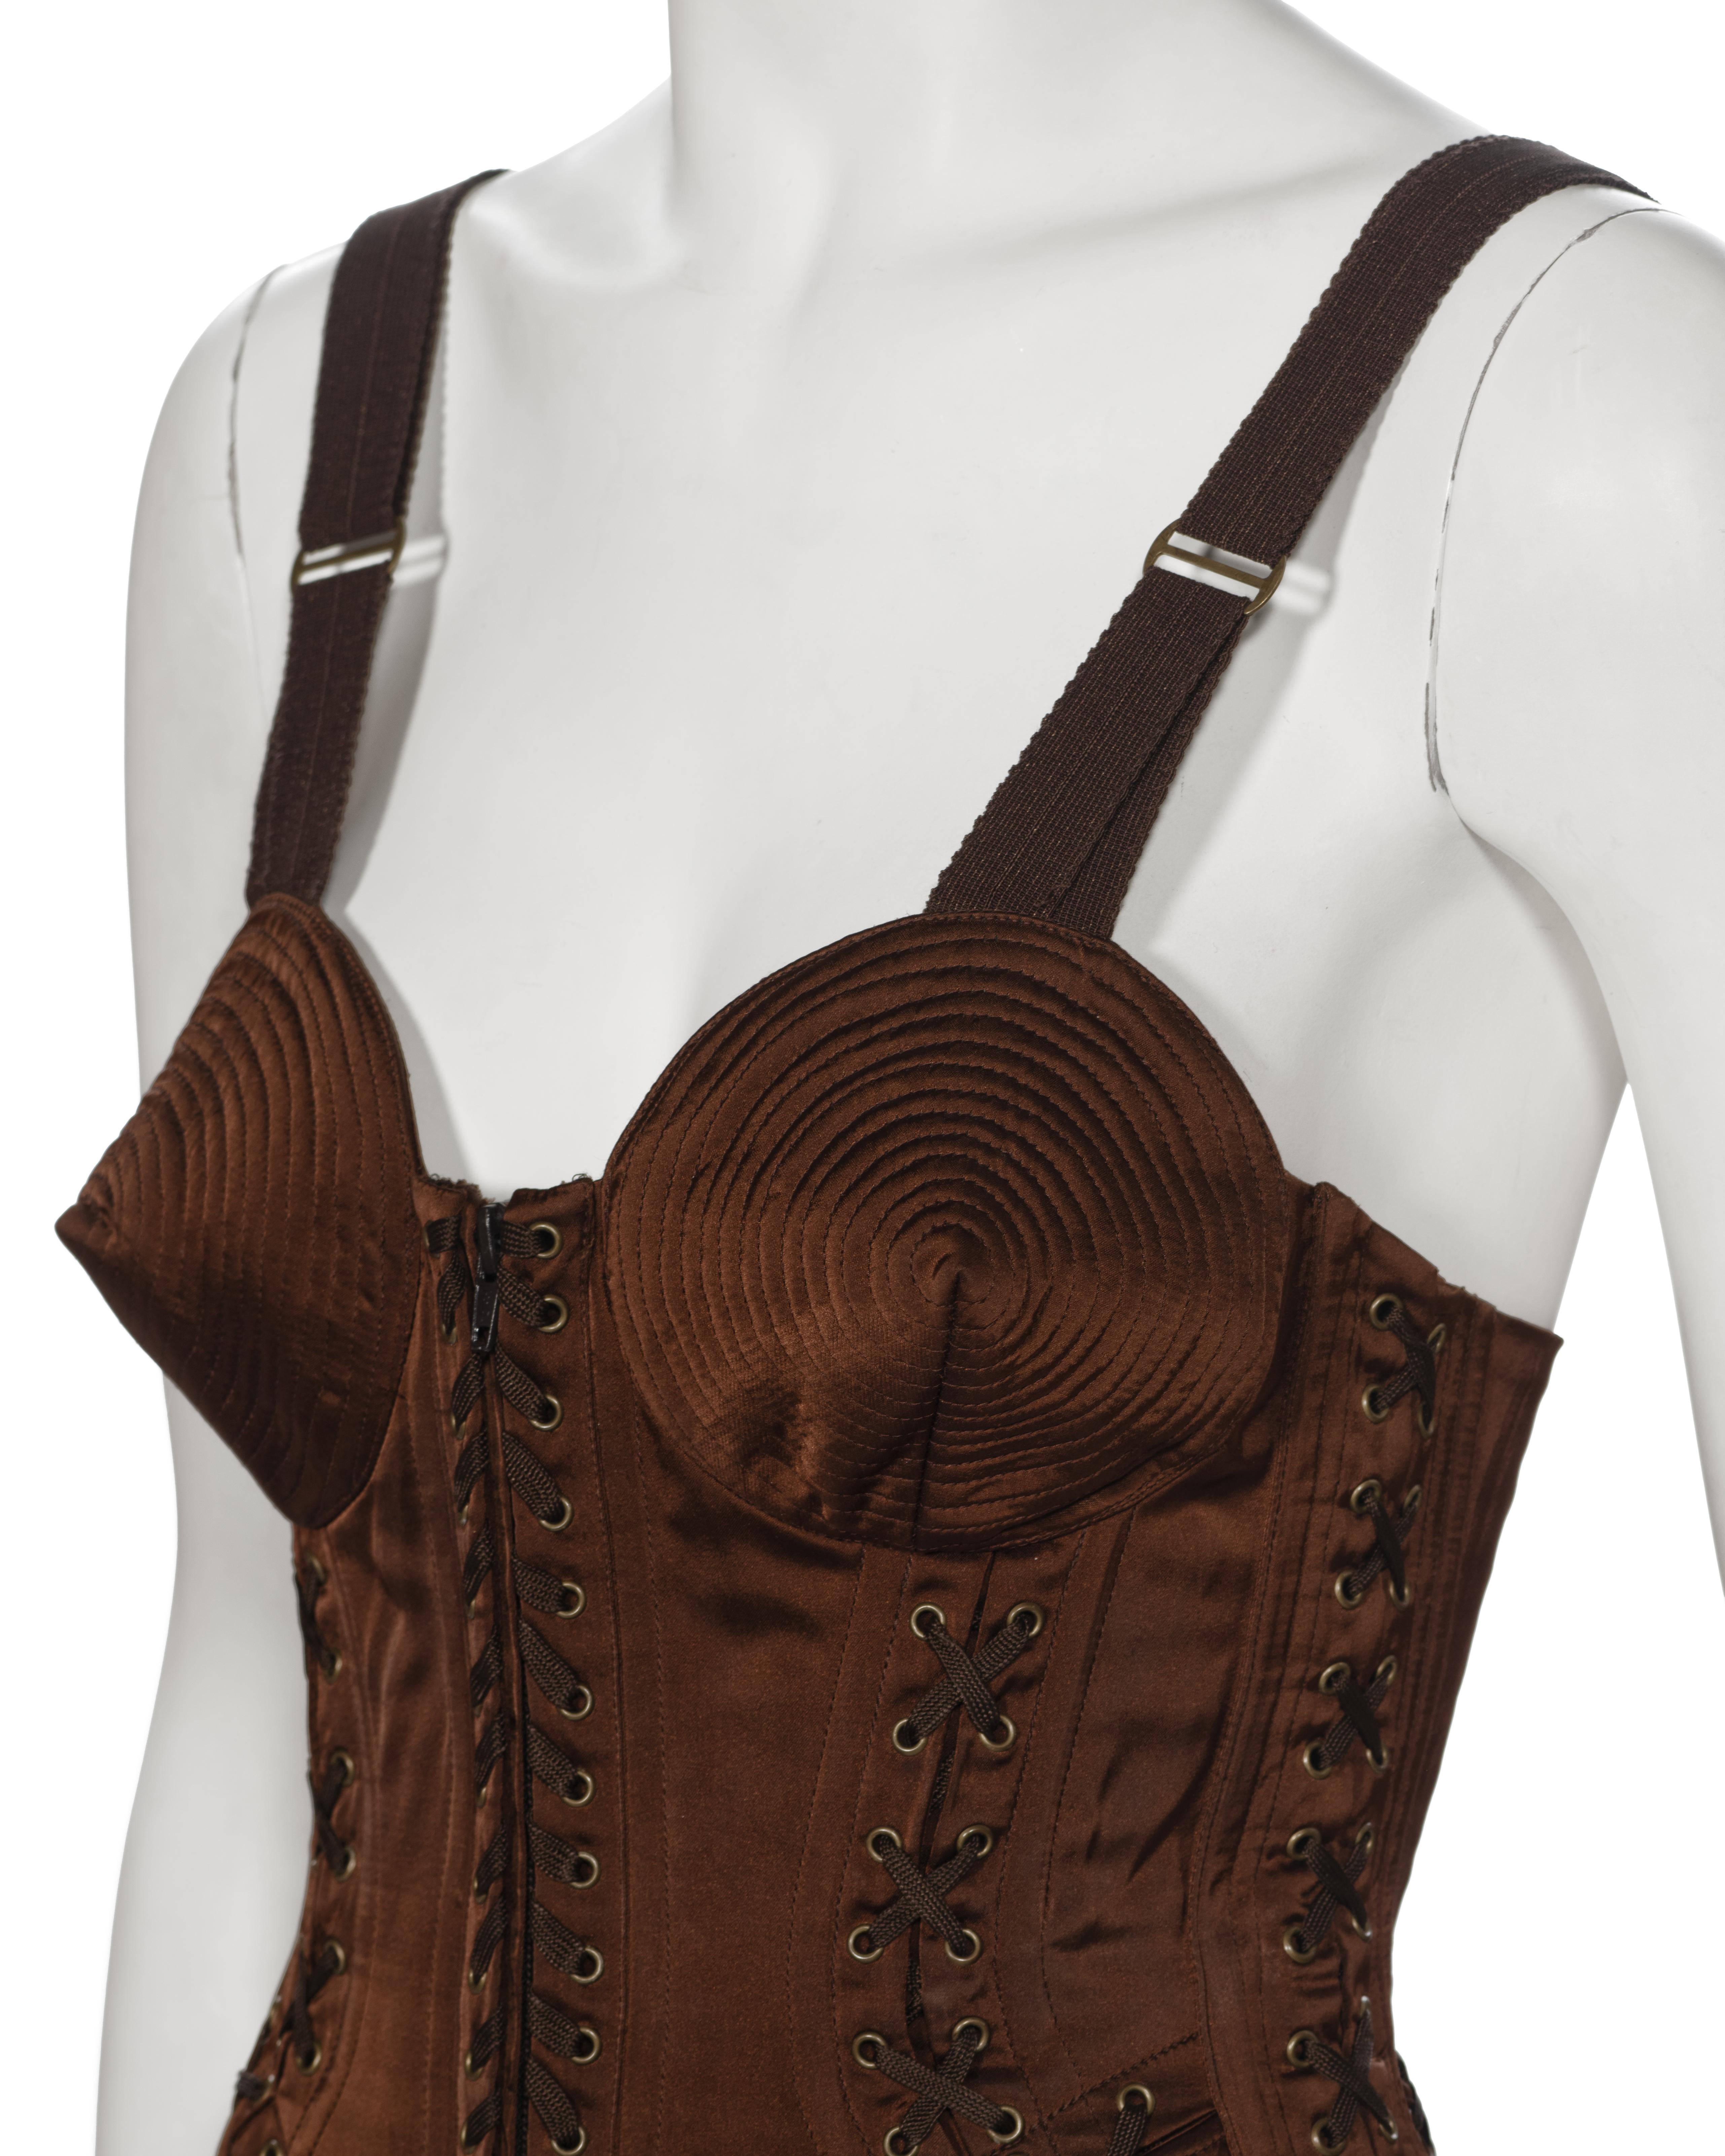 Jean Paul Gaultier Brown Corset Dress with Cone Bra and Fringed Hem, fw 1990 For Sale 15